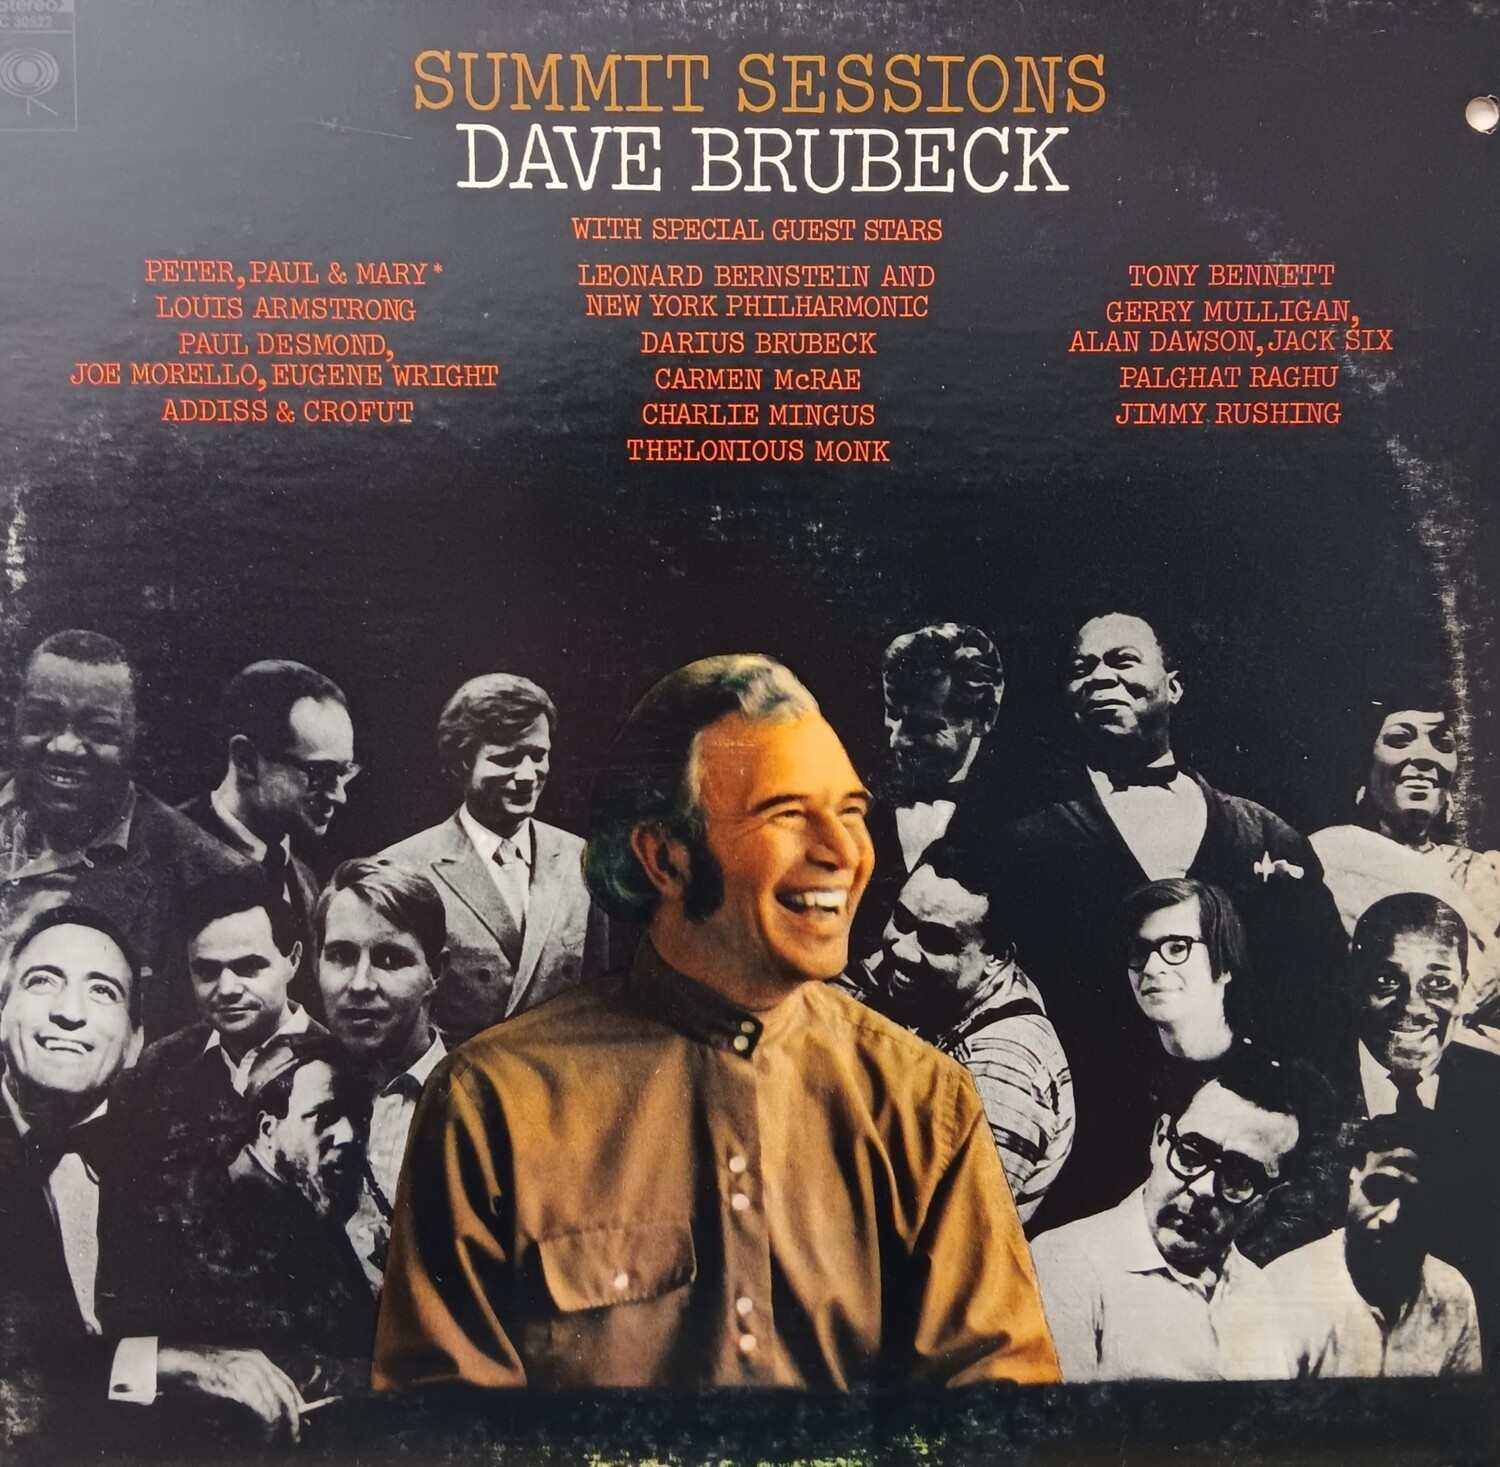 DAVE BRUBECK - Summit sessions